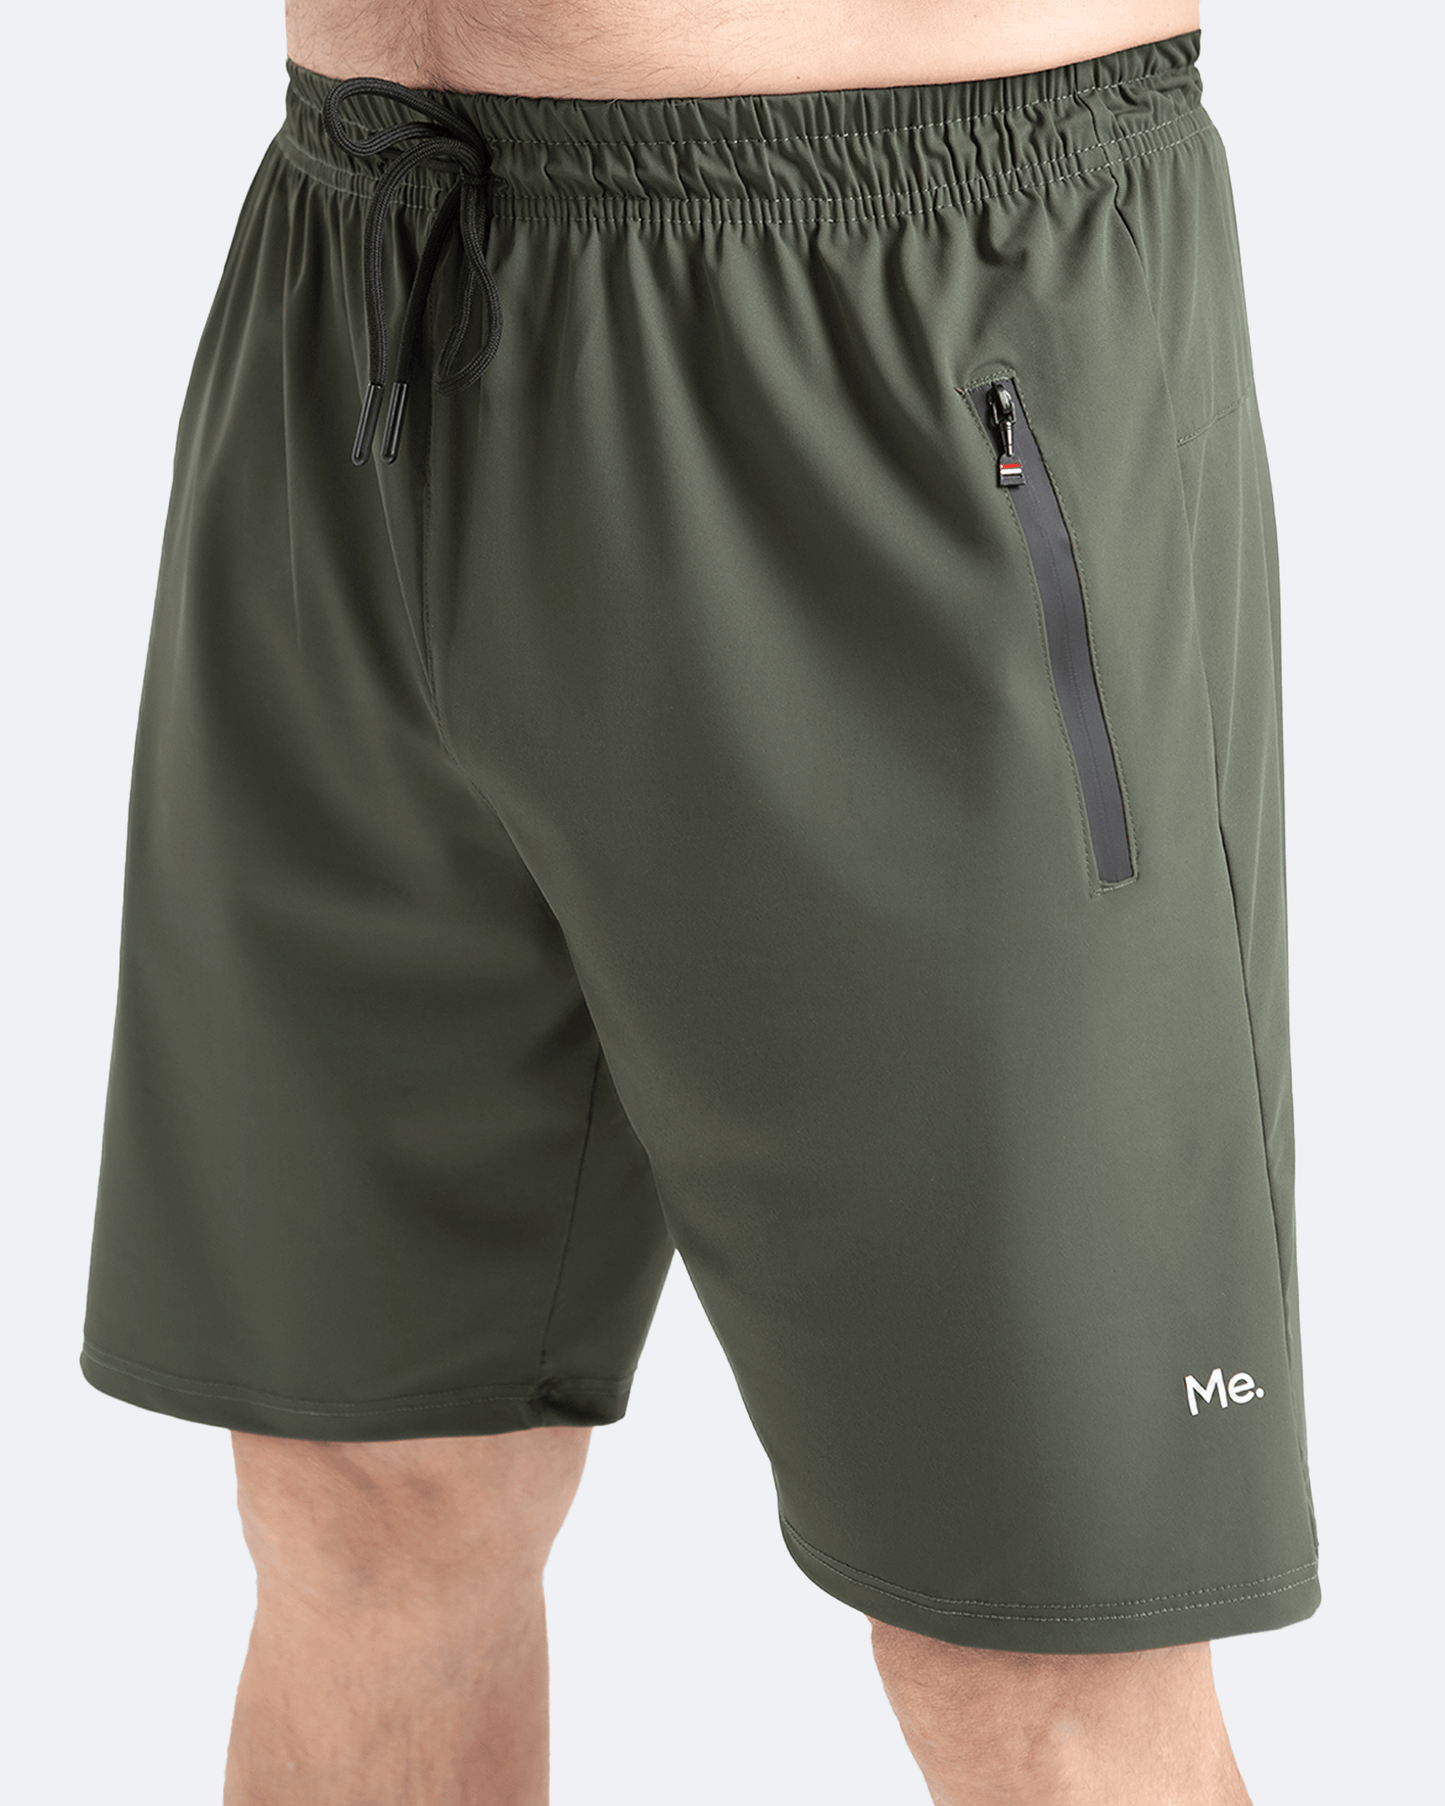 TEST Gym Shorts | Creating Power Within